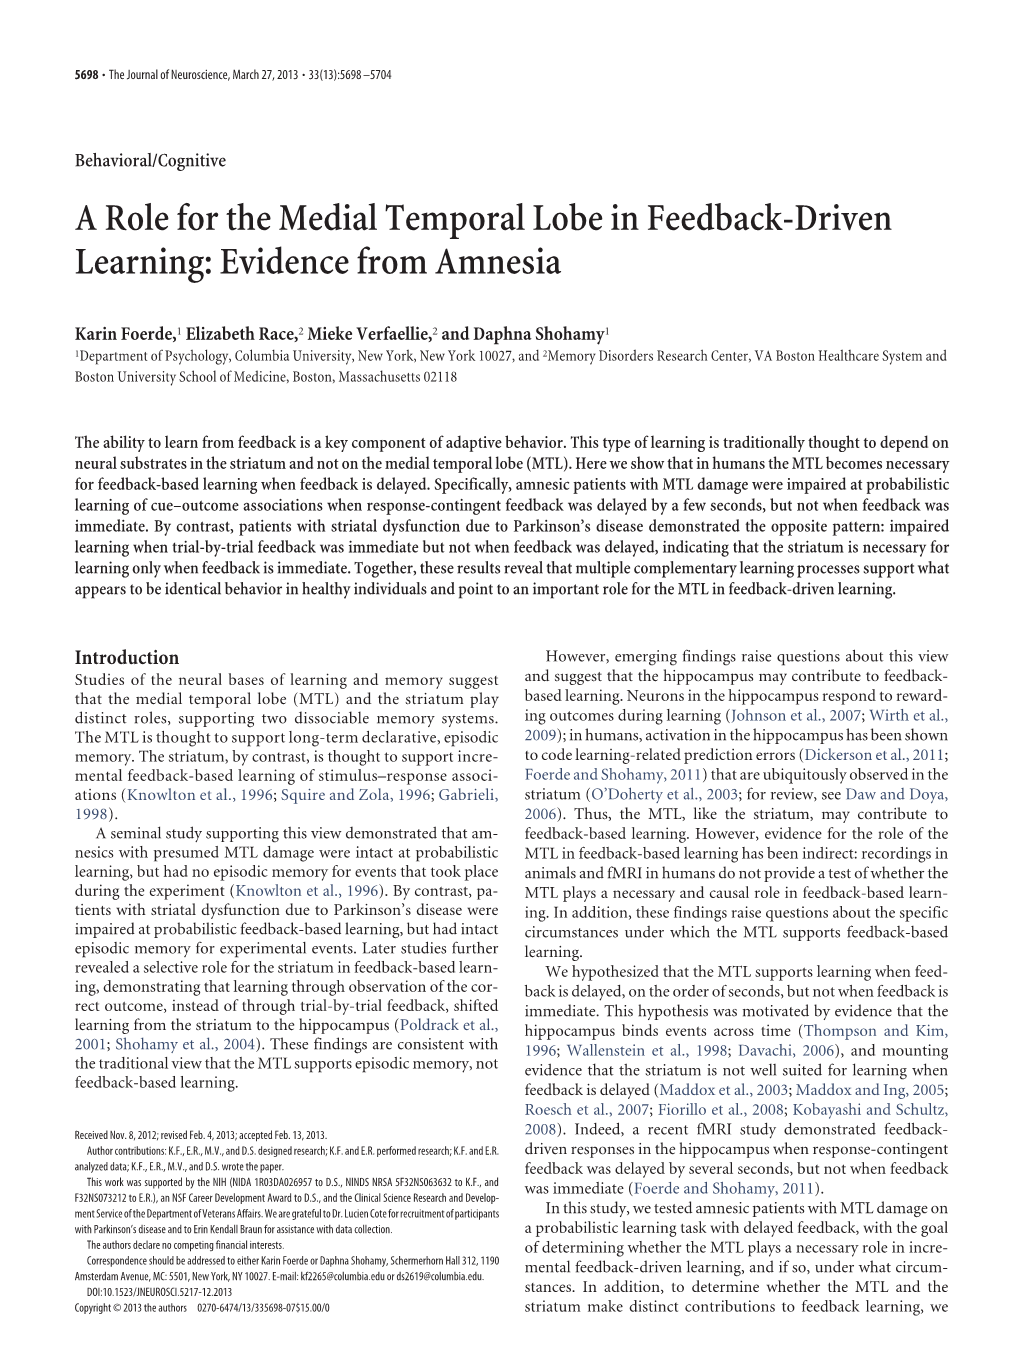 A Role for the Medial Temporal Lobe in Feedback-Driven Learning: Evidence from Amnesia